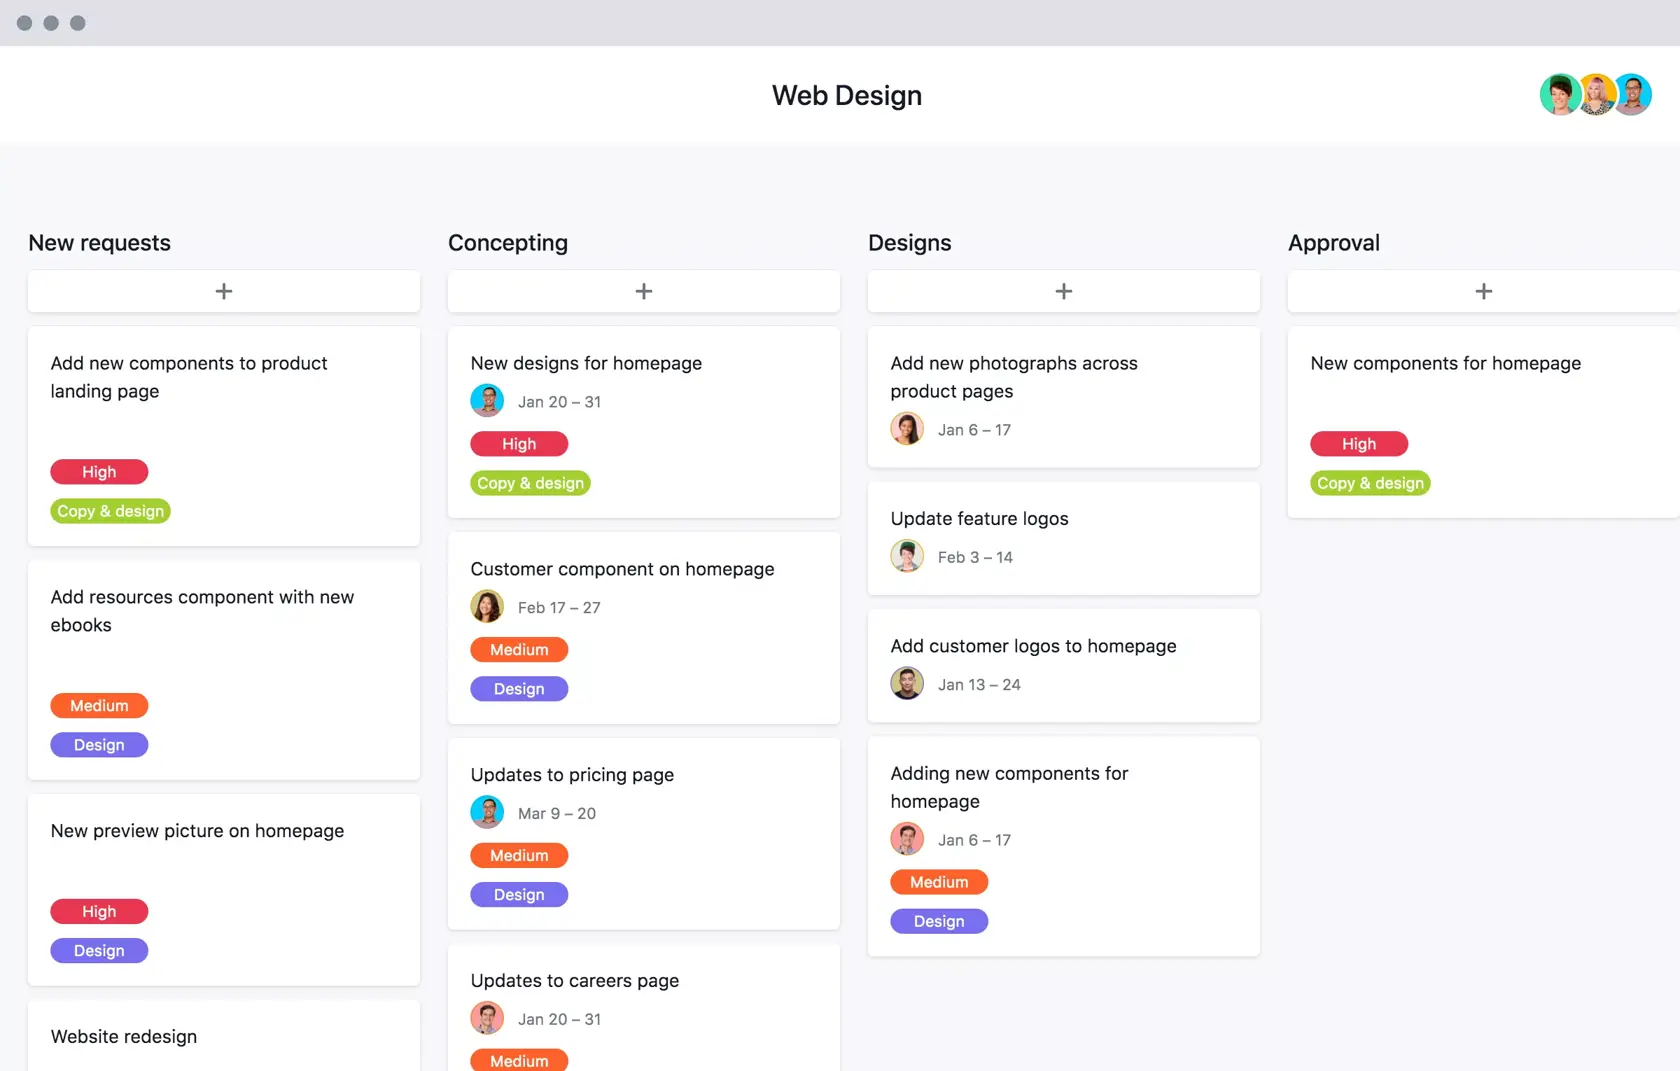 [Old product ui] Web design process template in Asana, Kanban board style project view (Boards)